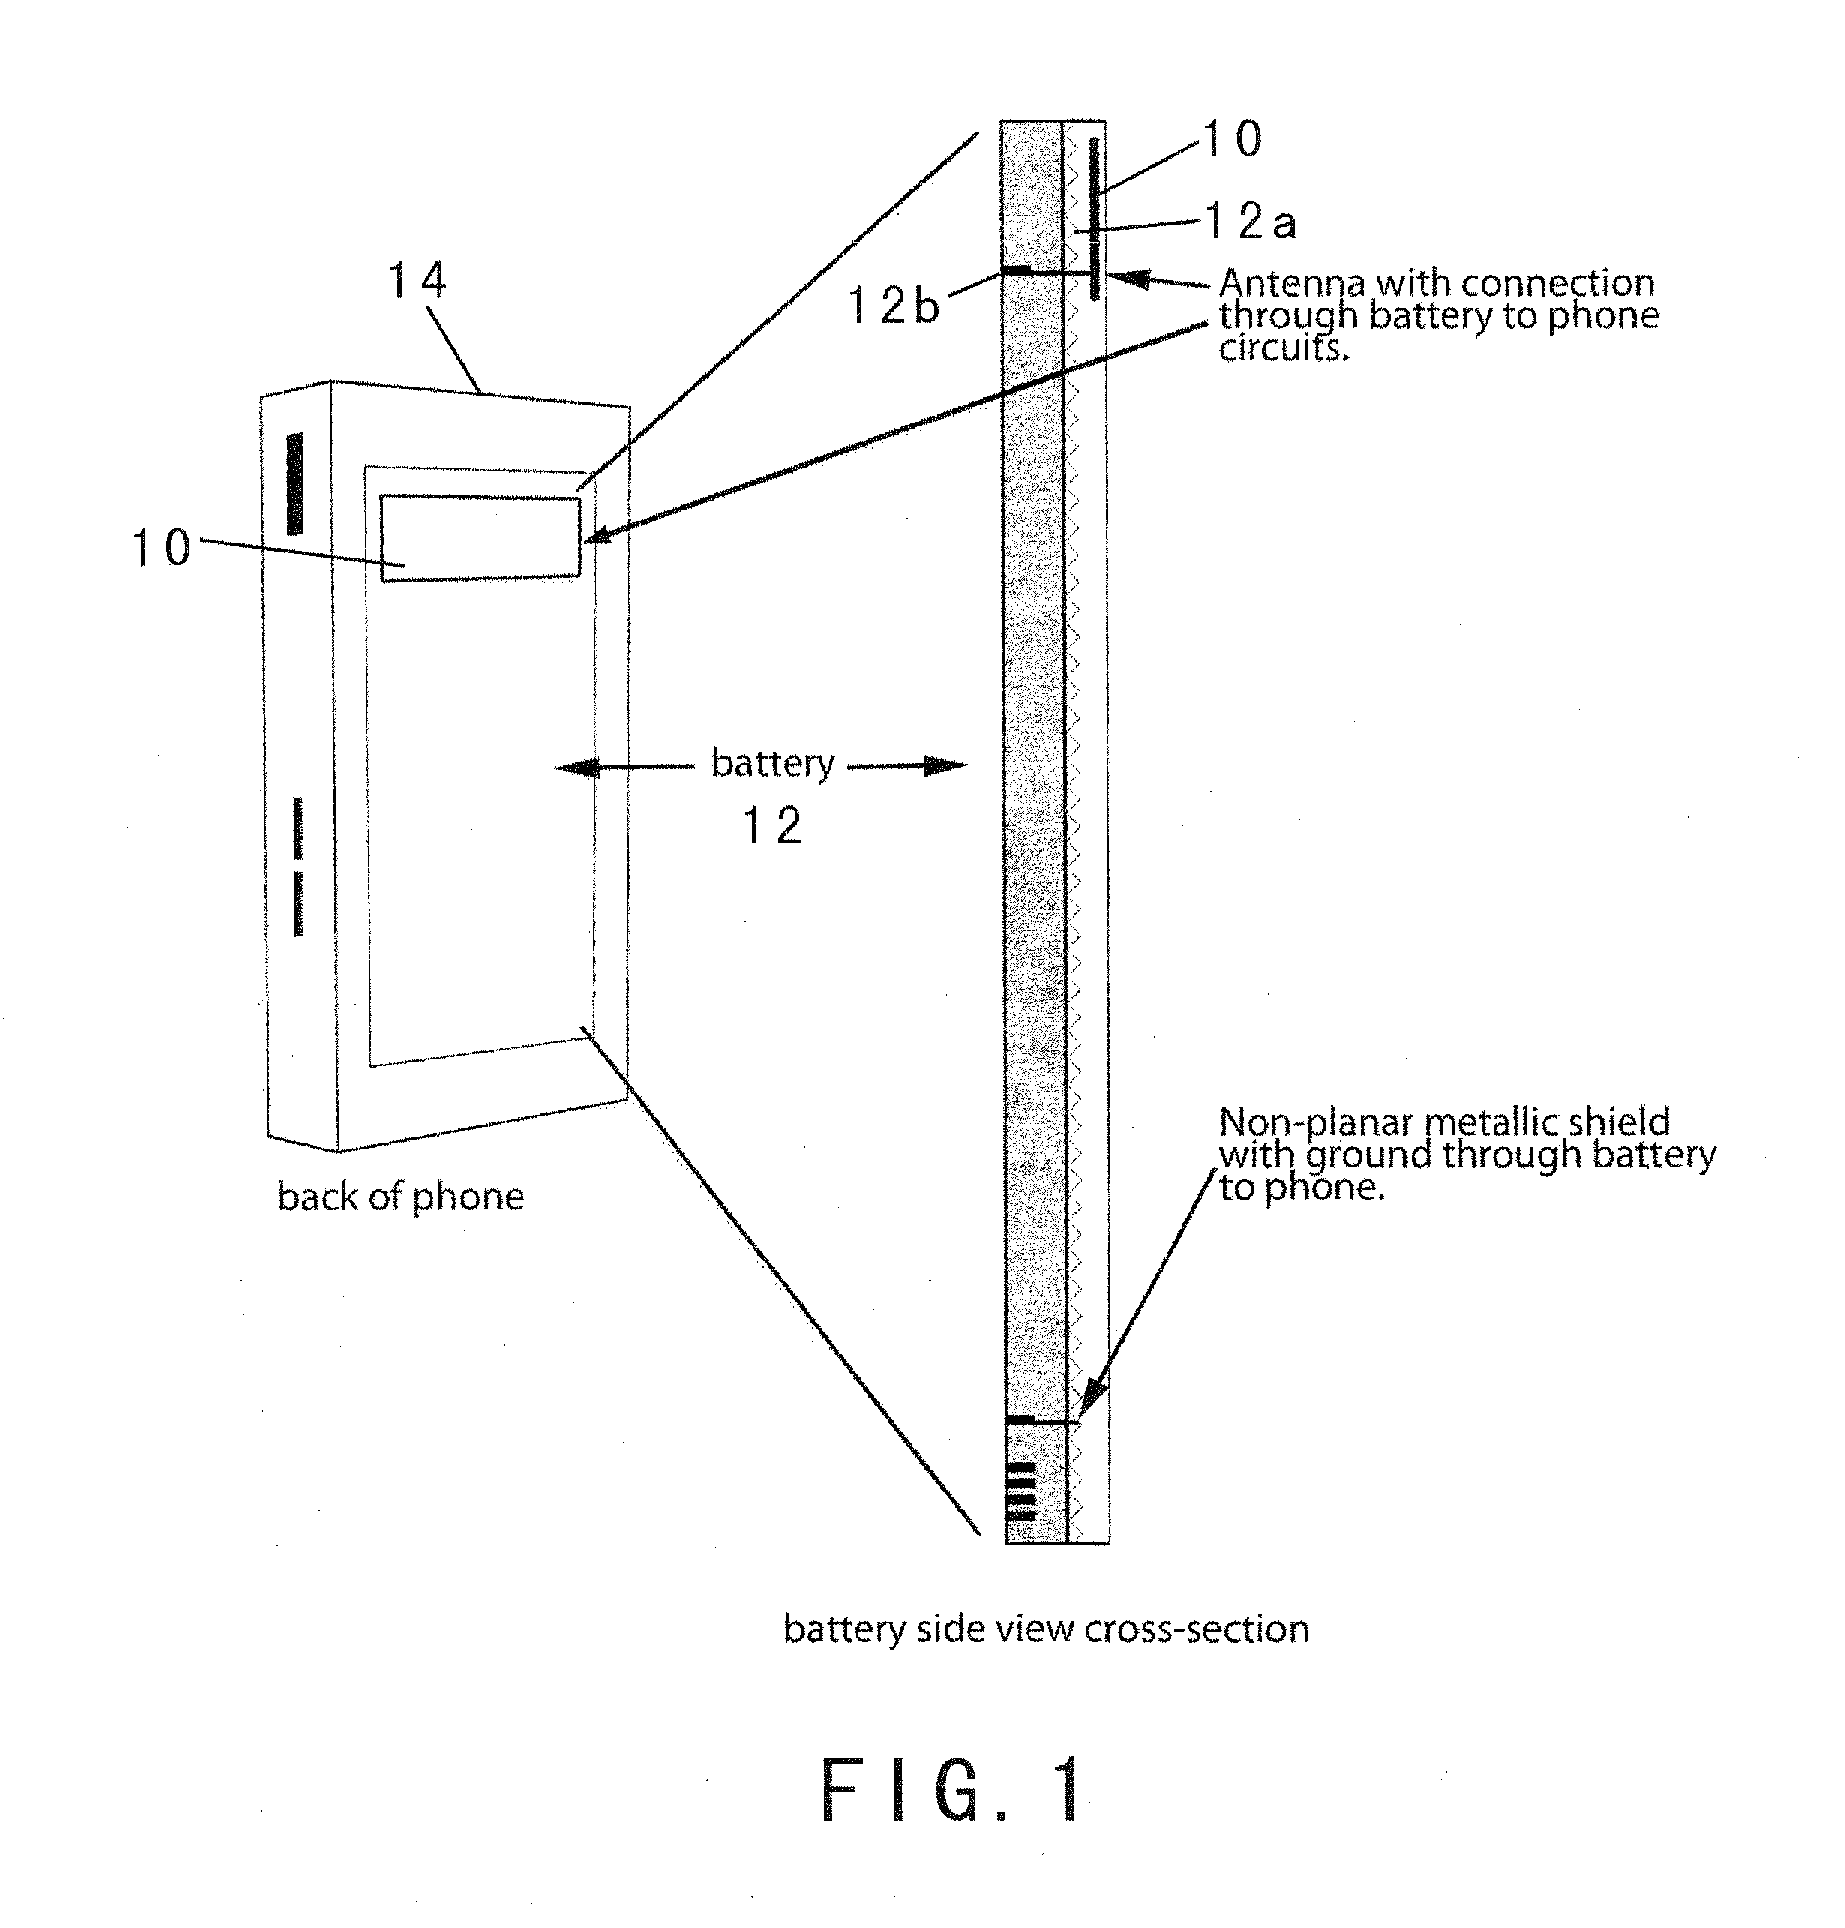 Radiation Redirecting External Case For Portable Communication Device and Antenna Embedded In Battery of Portable Communication Device